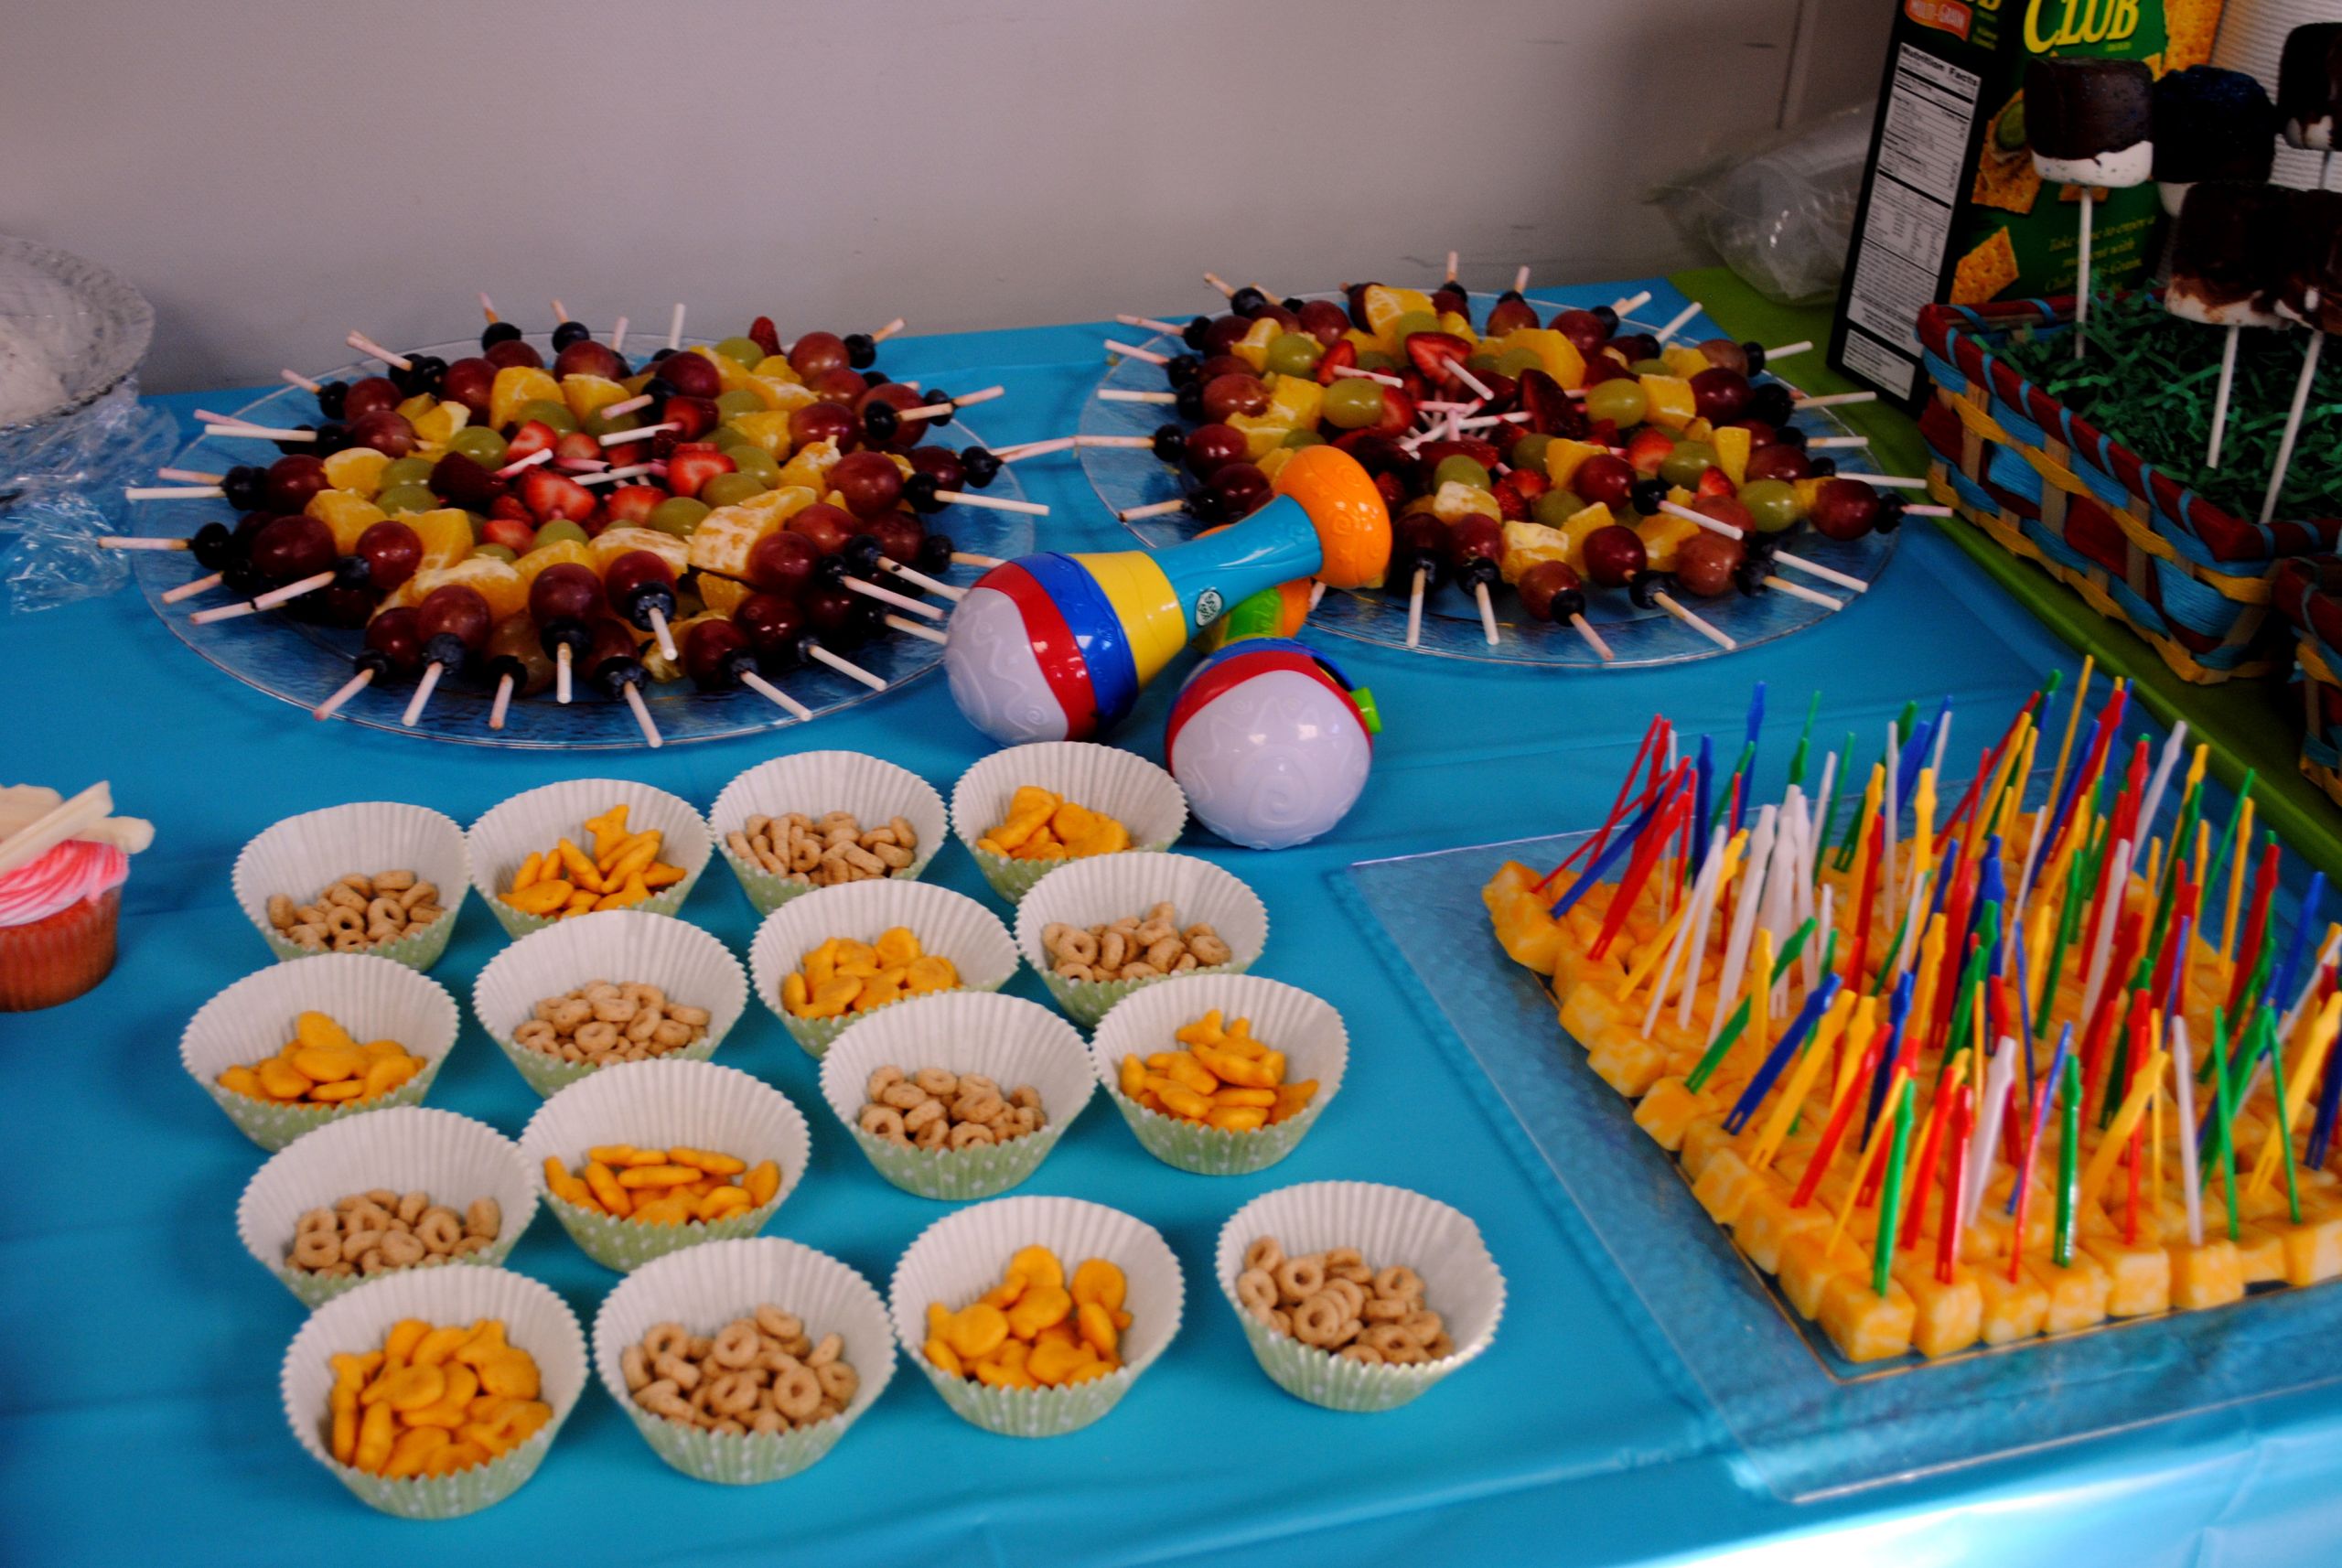 One Year Old Birthday Party Food Ideas
 Liam’s first birthday party